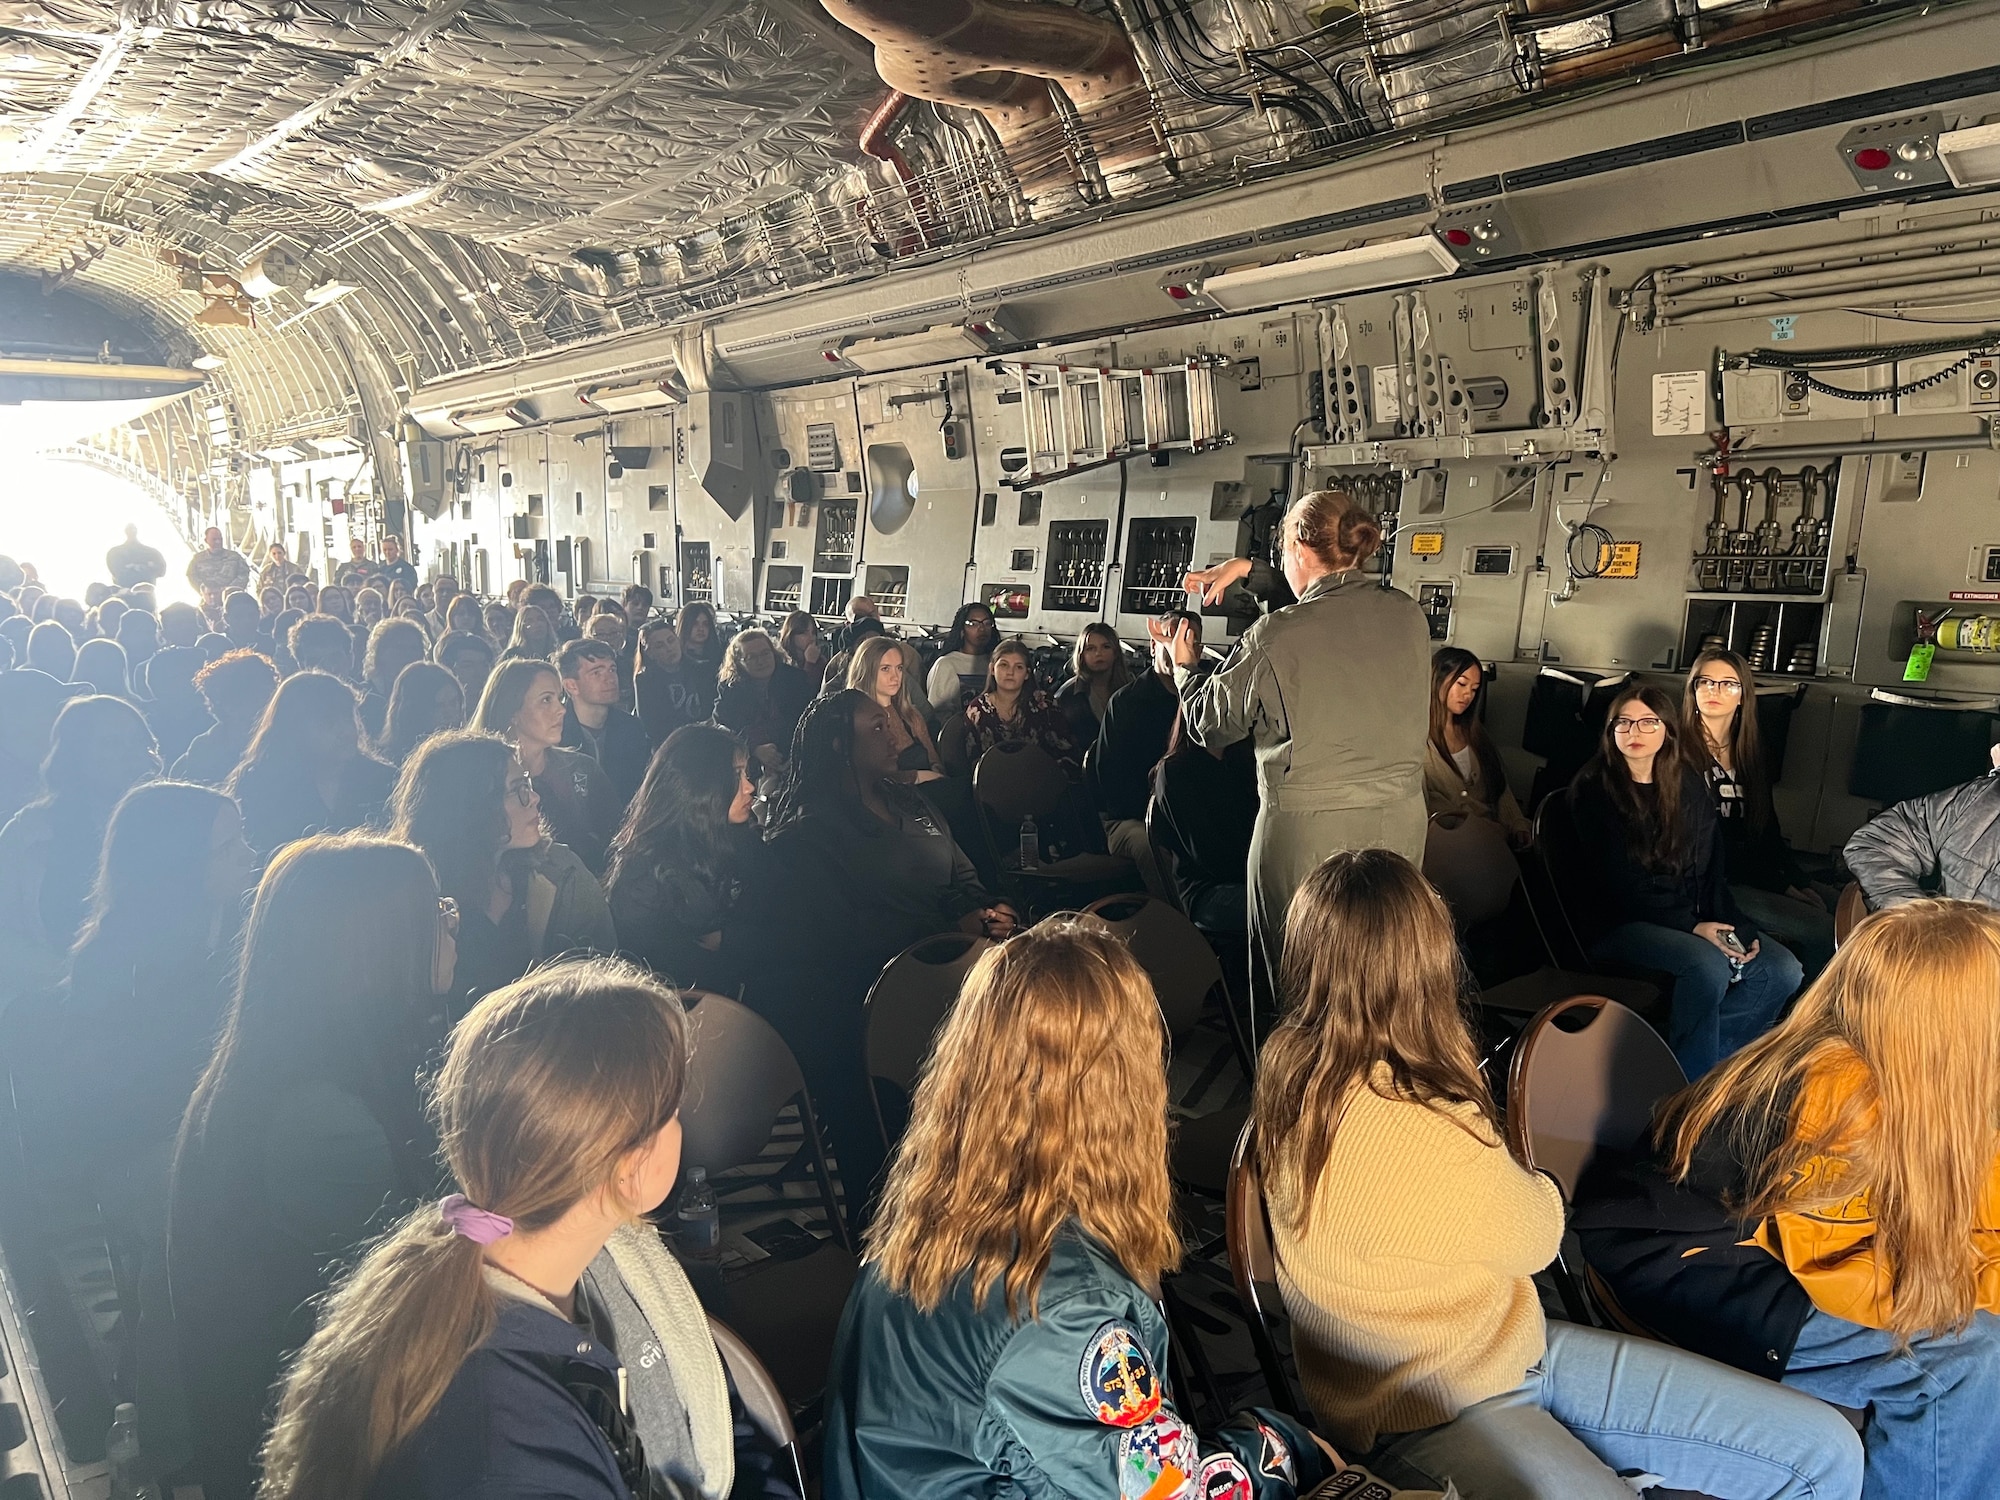 U.S. Air Force Staff Sgt. Jackie Mermolia, 58th Airlift Squadron loadmaster instructor, talks to students inside a C-17 Globemaster III aircraft at the 2023 Oklahoma Women in Aviation and Aerospace event at Will Rogers Air National Guard Air Base, Oklahoma, Dec. 8, 2023. Students from all over Oklahoma attended the event that was held to highlight the contributions of women in aviation and aerospace career fields in Oklahoma. (Courtesy photo by U.S. Air Force Maj. Megan Edson).